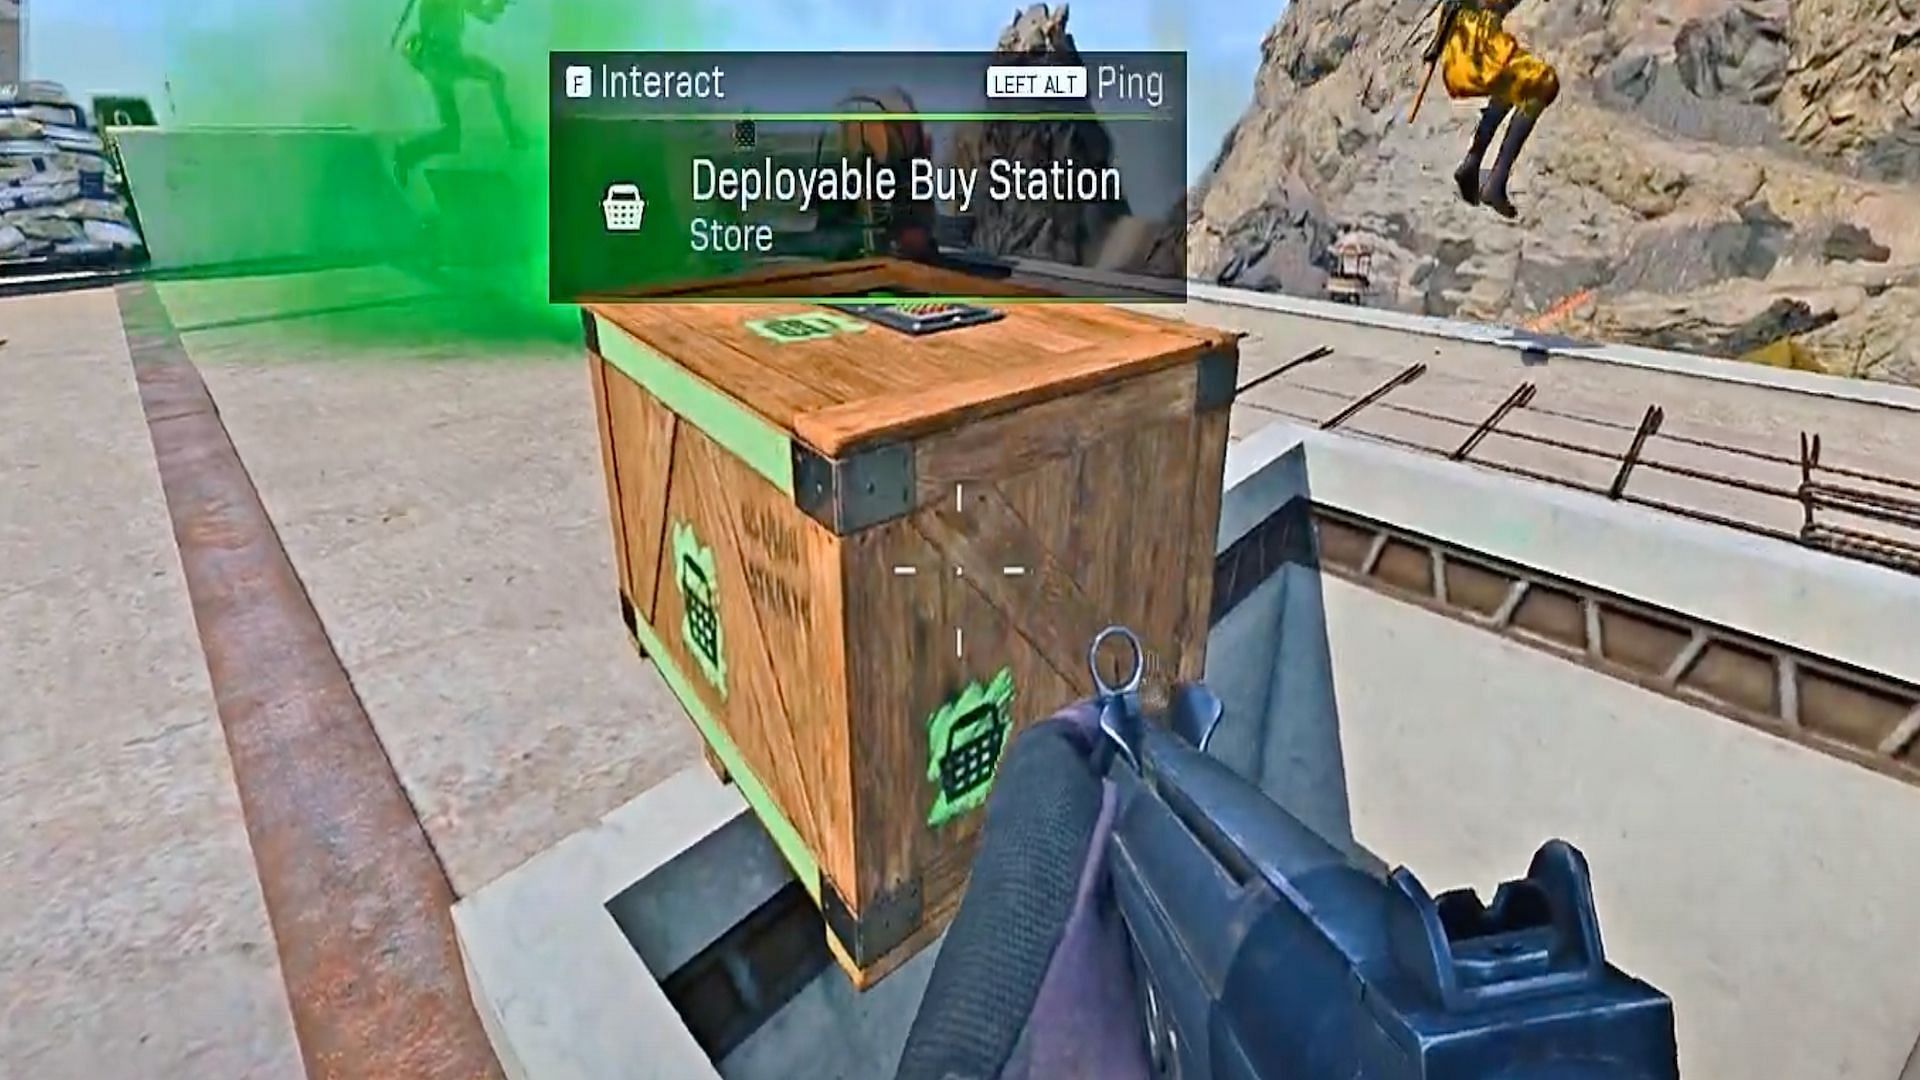 COD Warzone Players can call down Deployable Buy Stations to help their teams gain the advantage in-game (Image via Halil Aydoğan/YouTube)